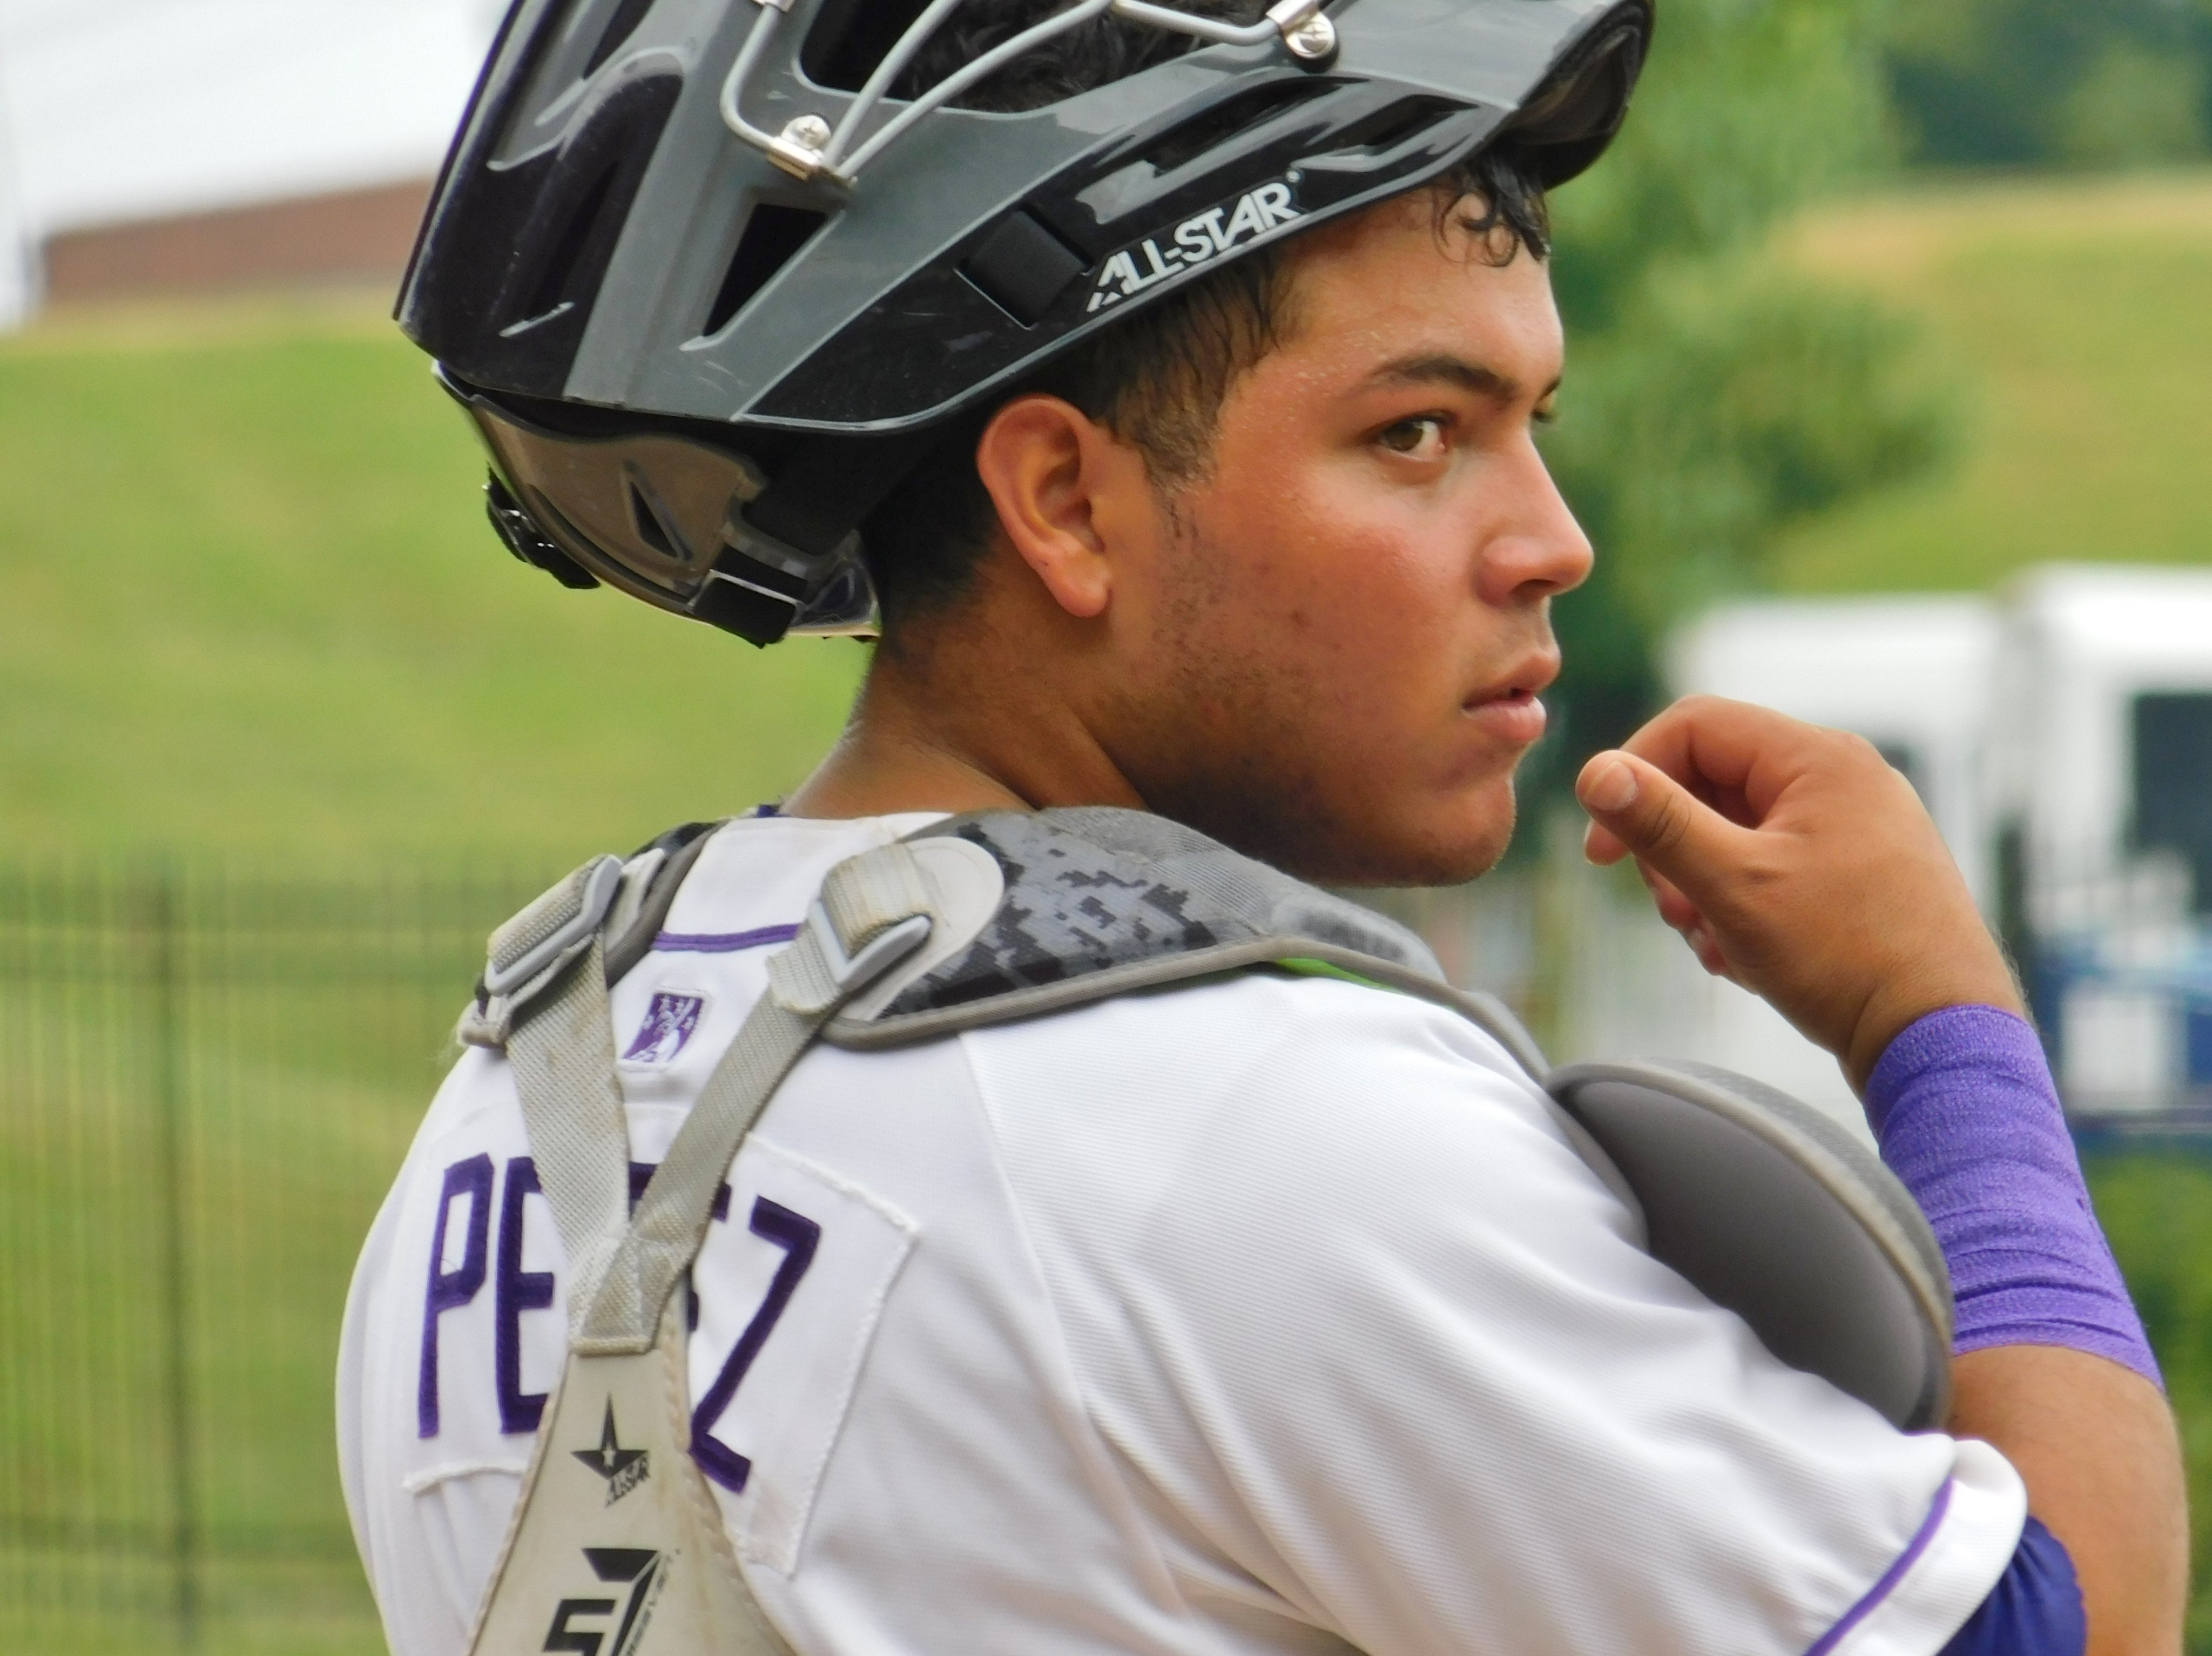 Carlos Pérez stands pictured from the back, wearing a Dash uniform and looking to the right with his catcher’s mask pulled back